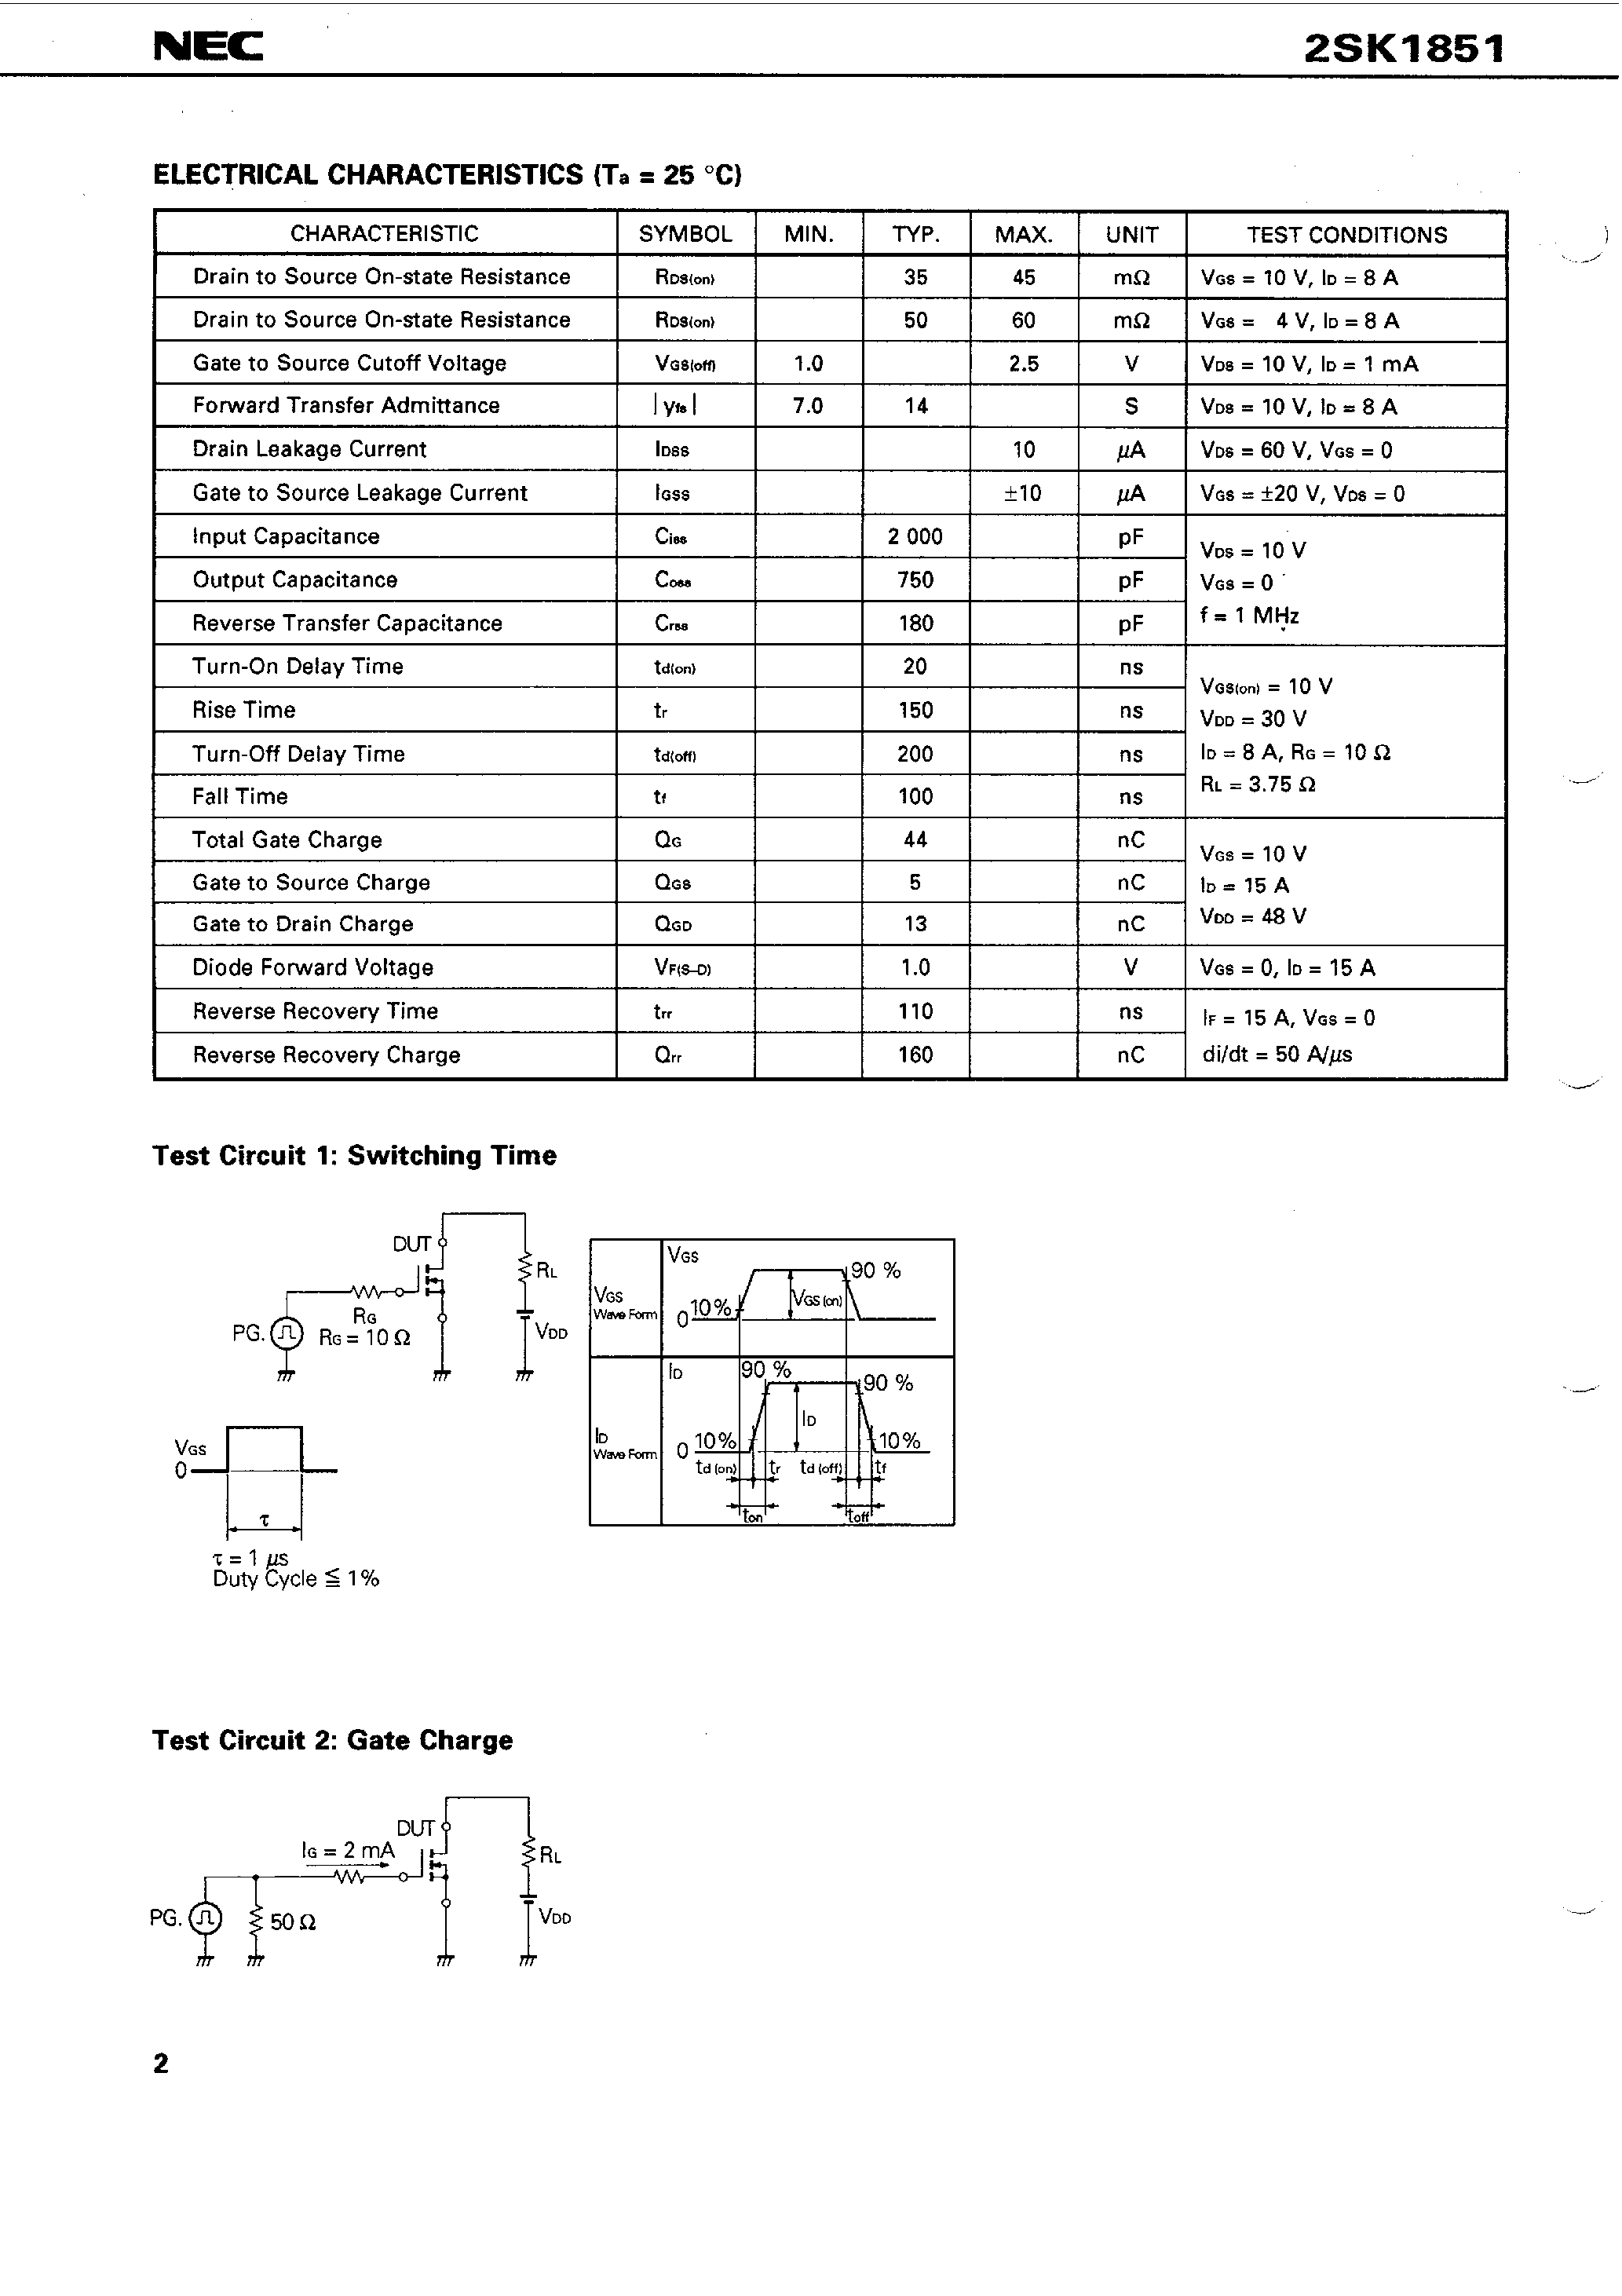 Datasheet K1851 - Search -----> 2SK1851 page 2